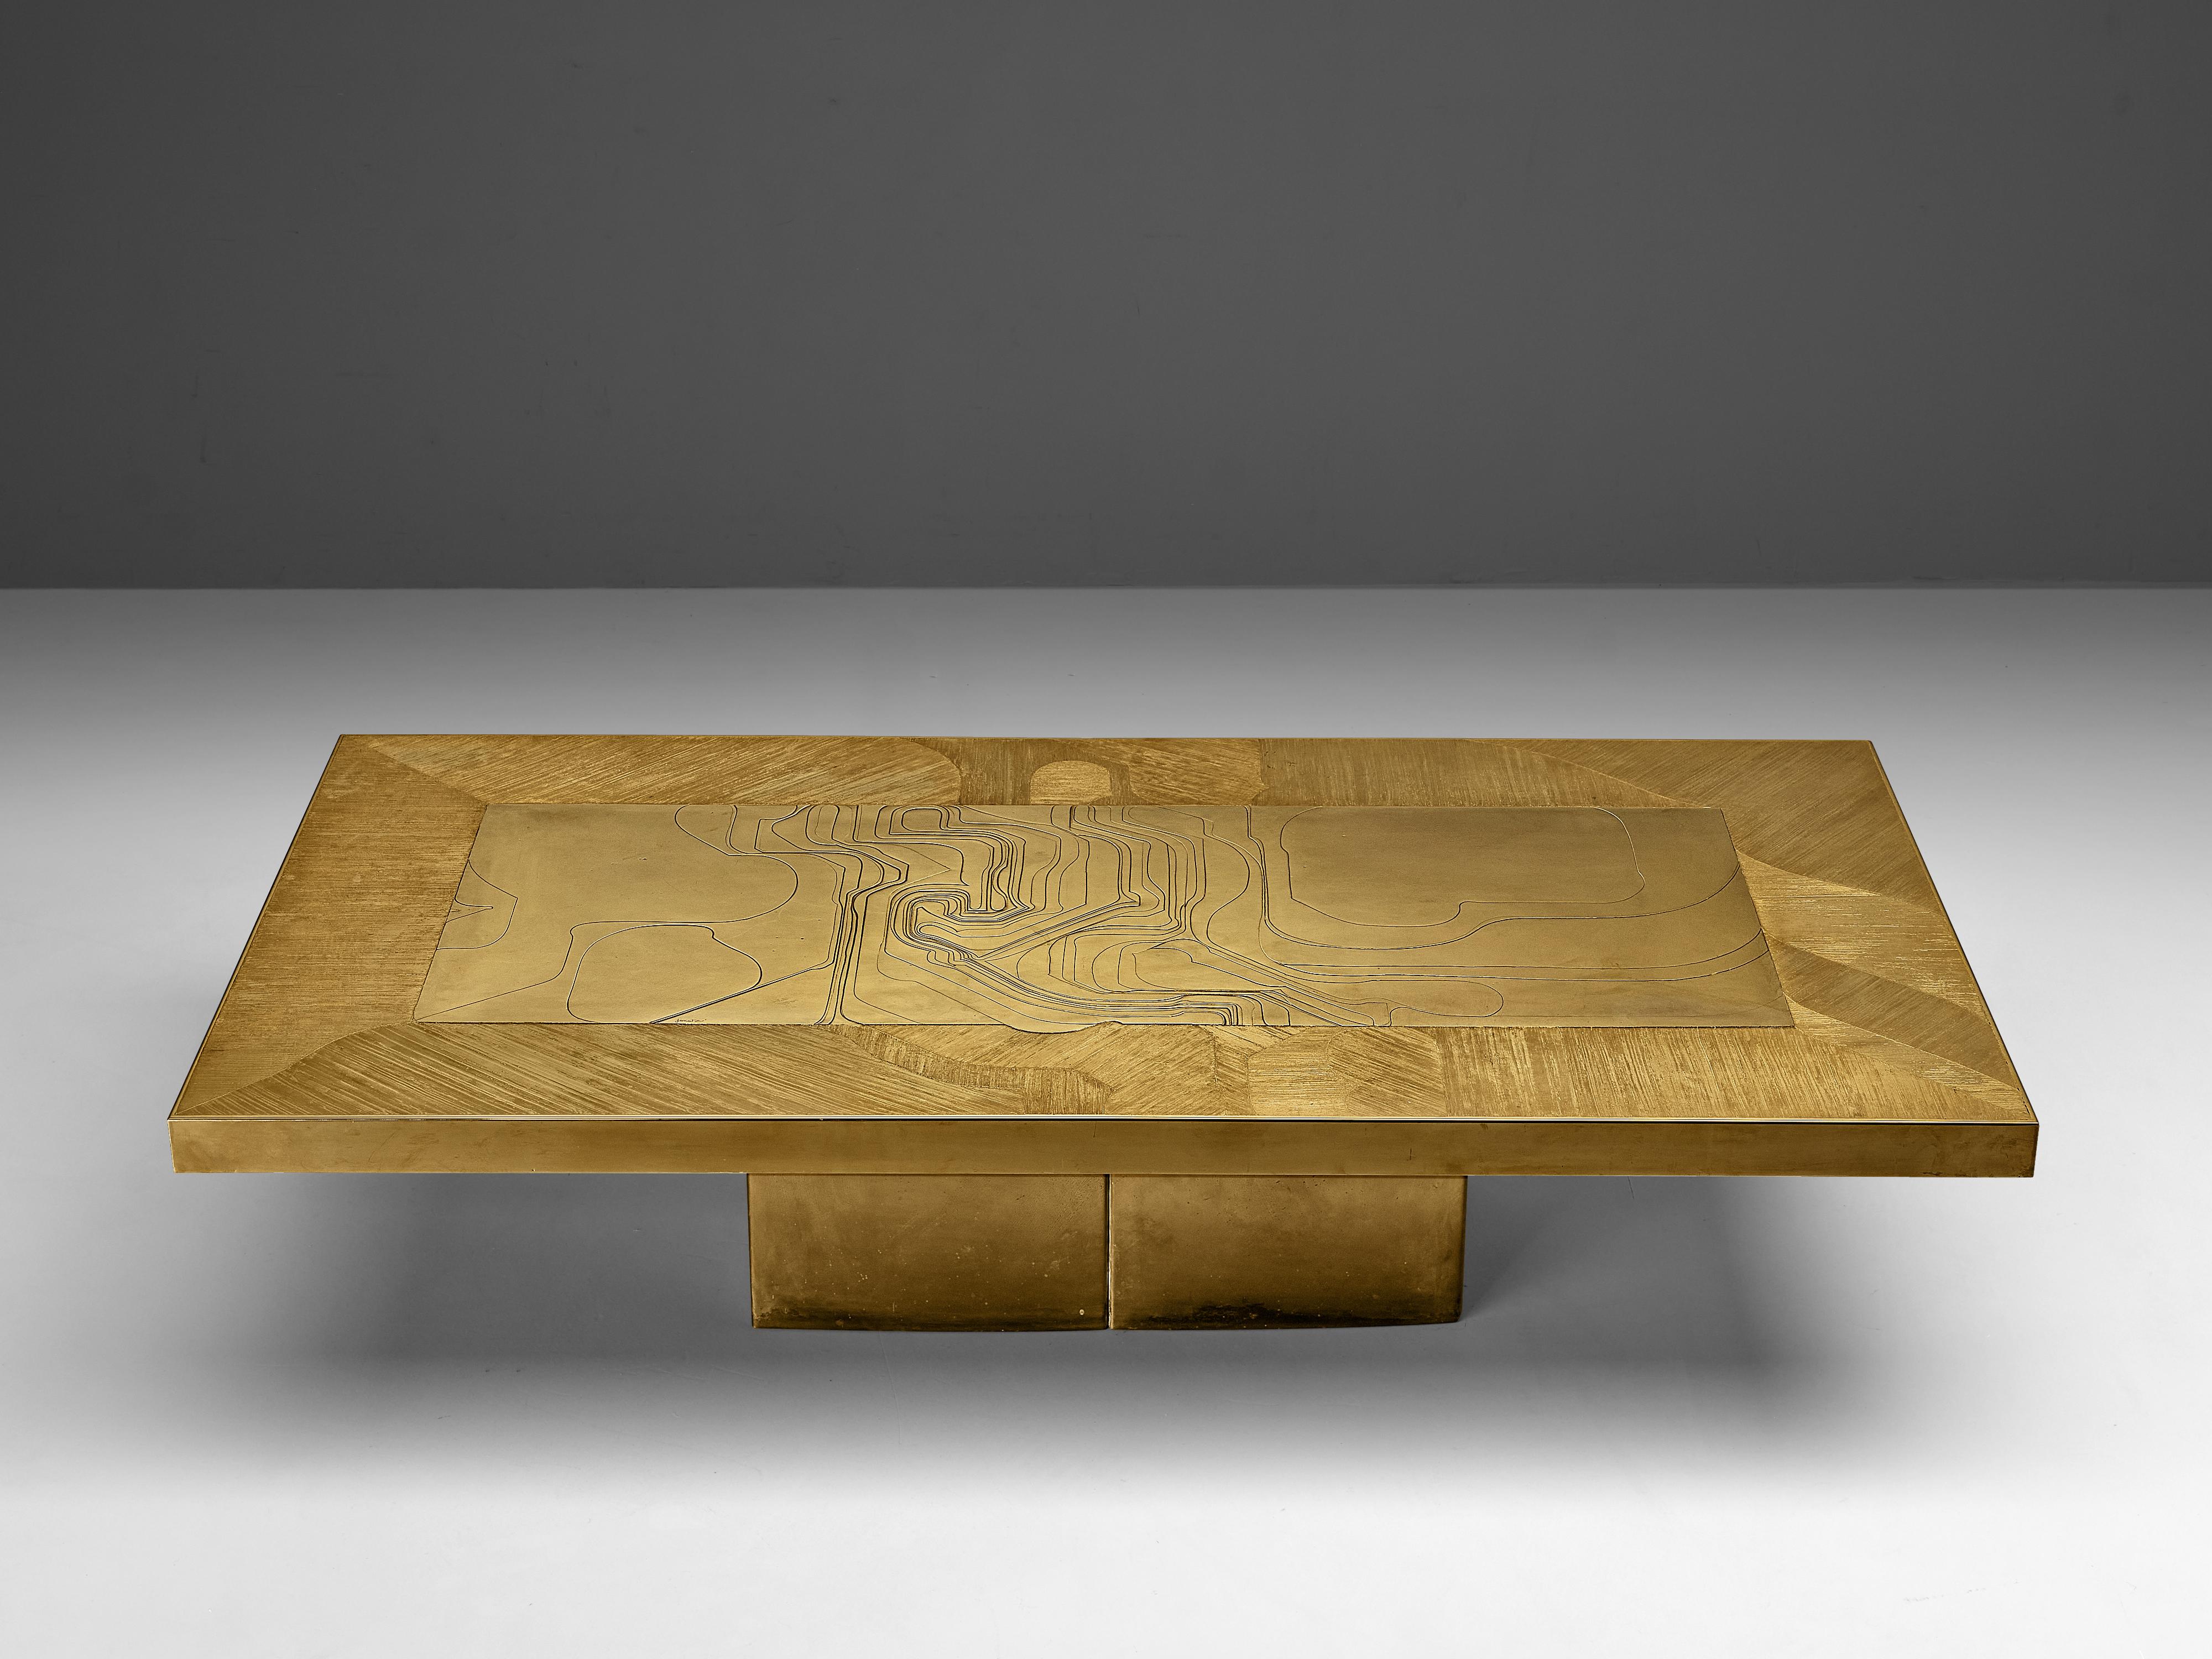 Nadie Jenatzy, coffee table, etched brass, Belgium, circa 1980

This refined brass coffee table is on the edge between sculpture and functional table. The rectangular top with vividly etched lines seems to float above the base. A frame of closely